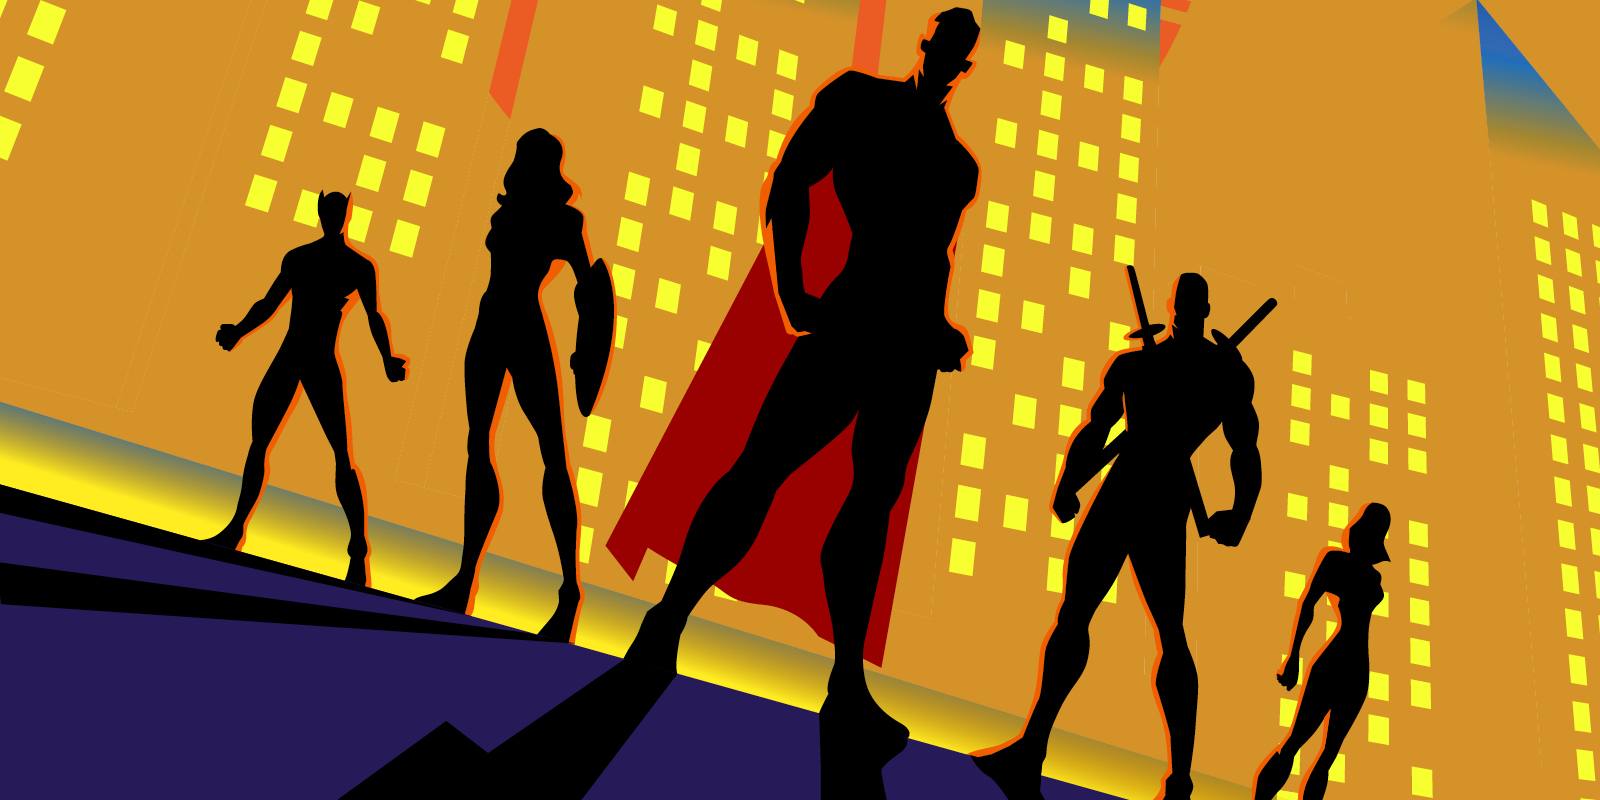 Five superheroes in silhouette against a yellow city background